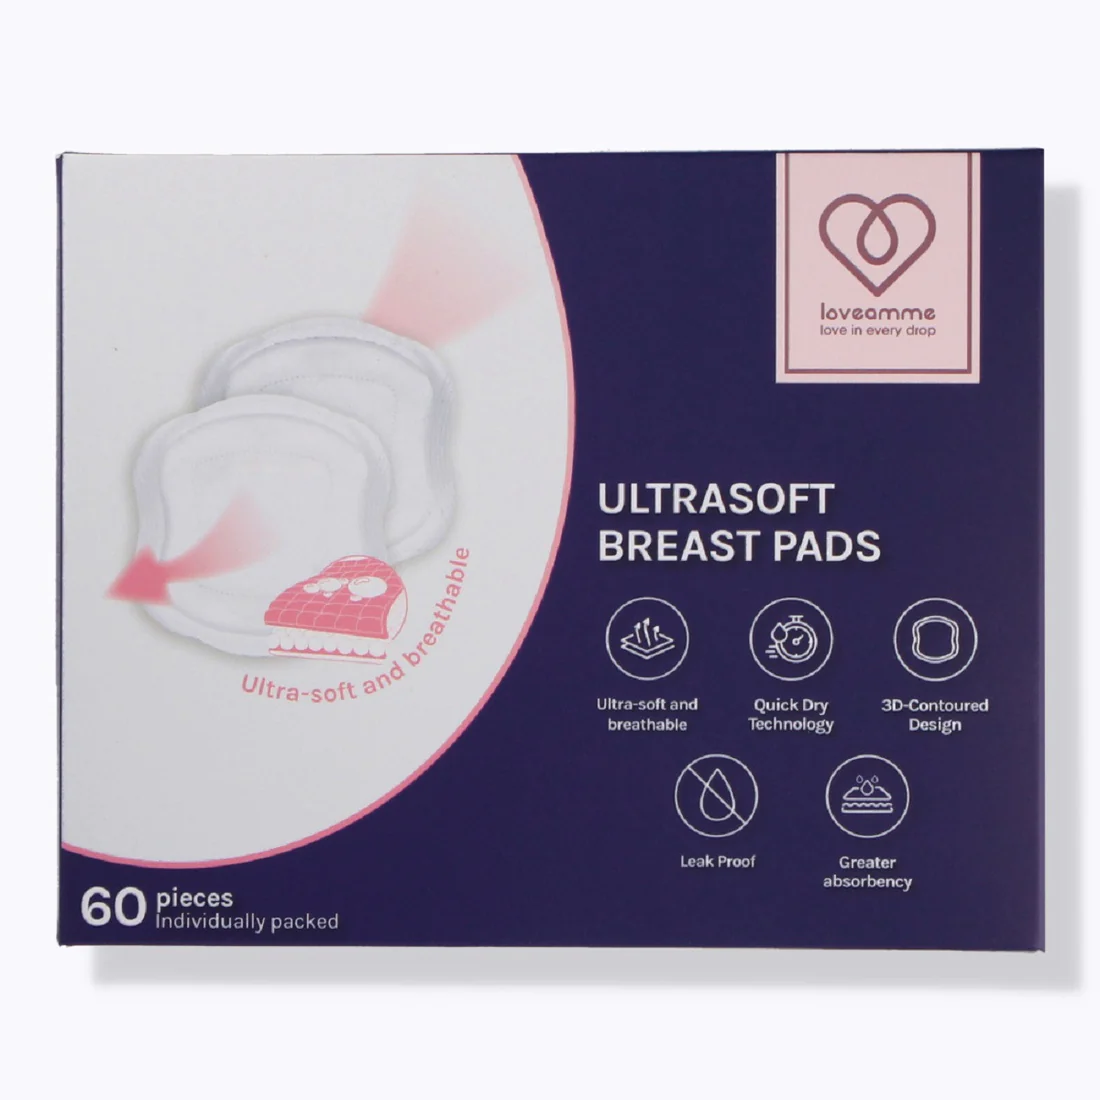 LoveAmme Ultrasoft Breast Pads 60s (Buy 1 Get 1 FREE!)